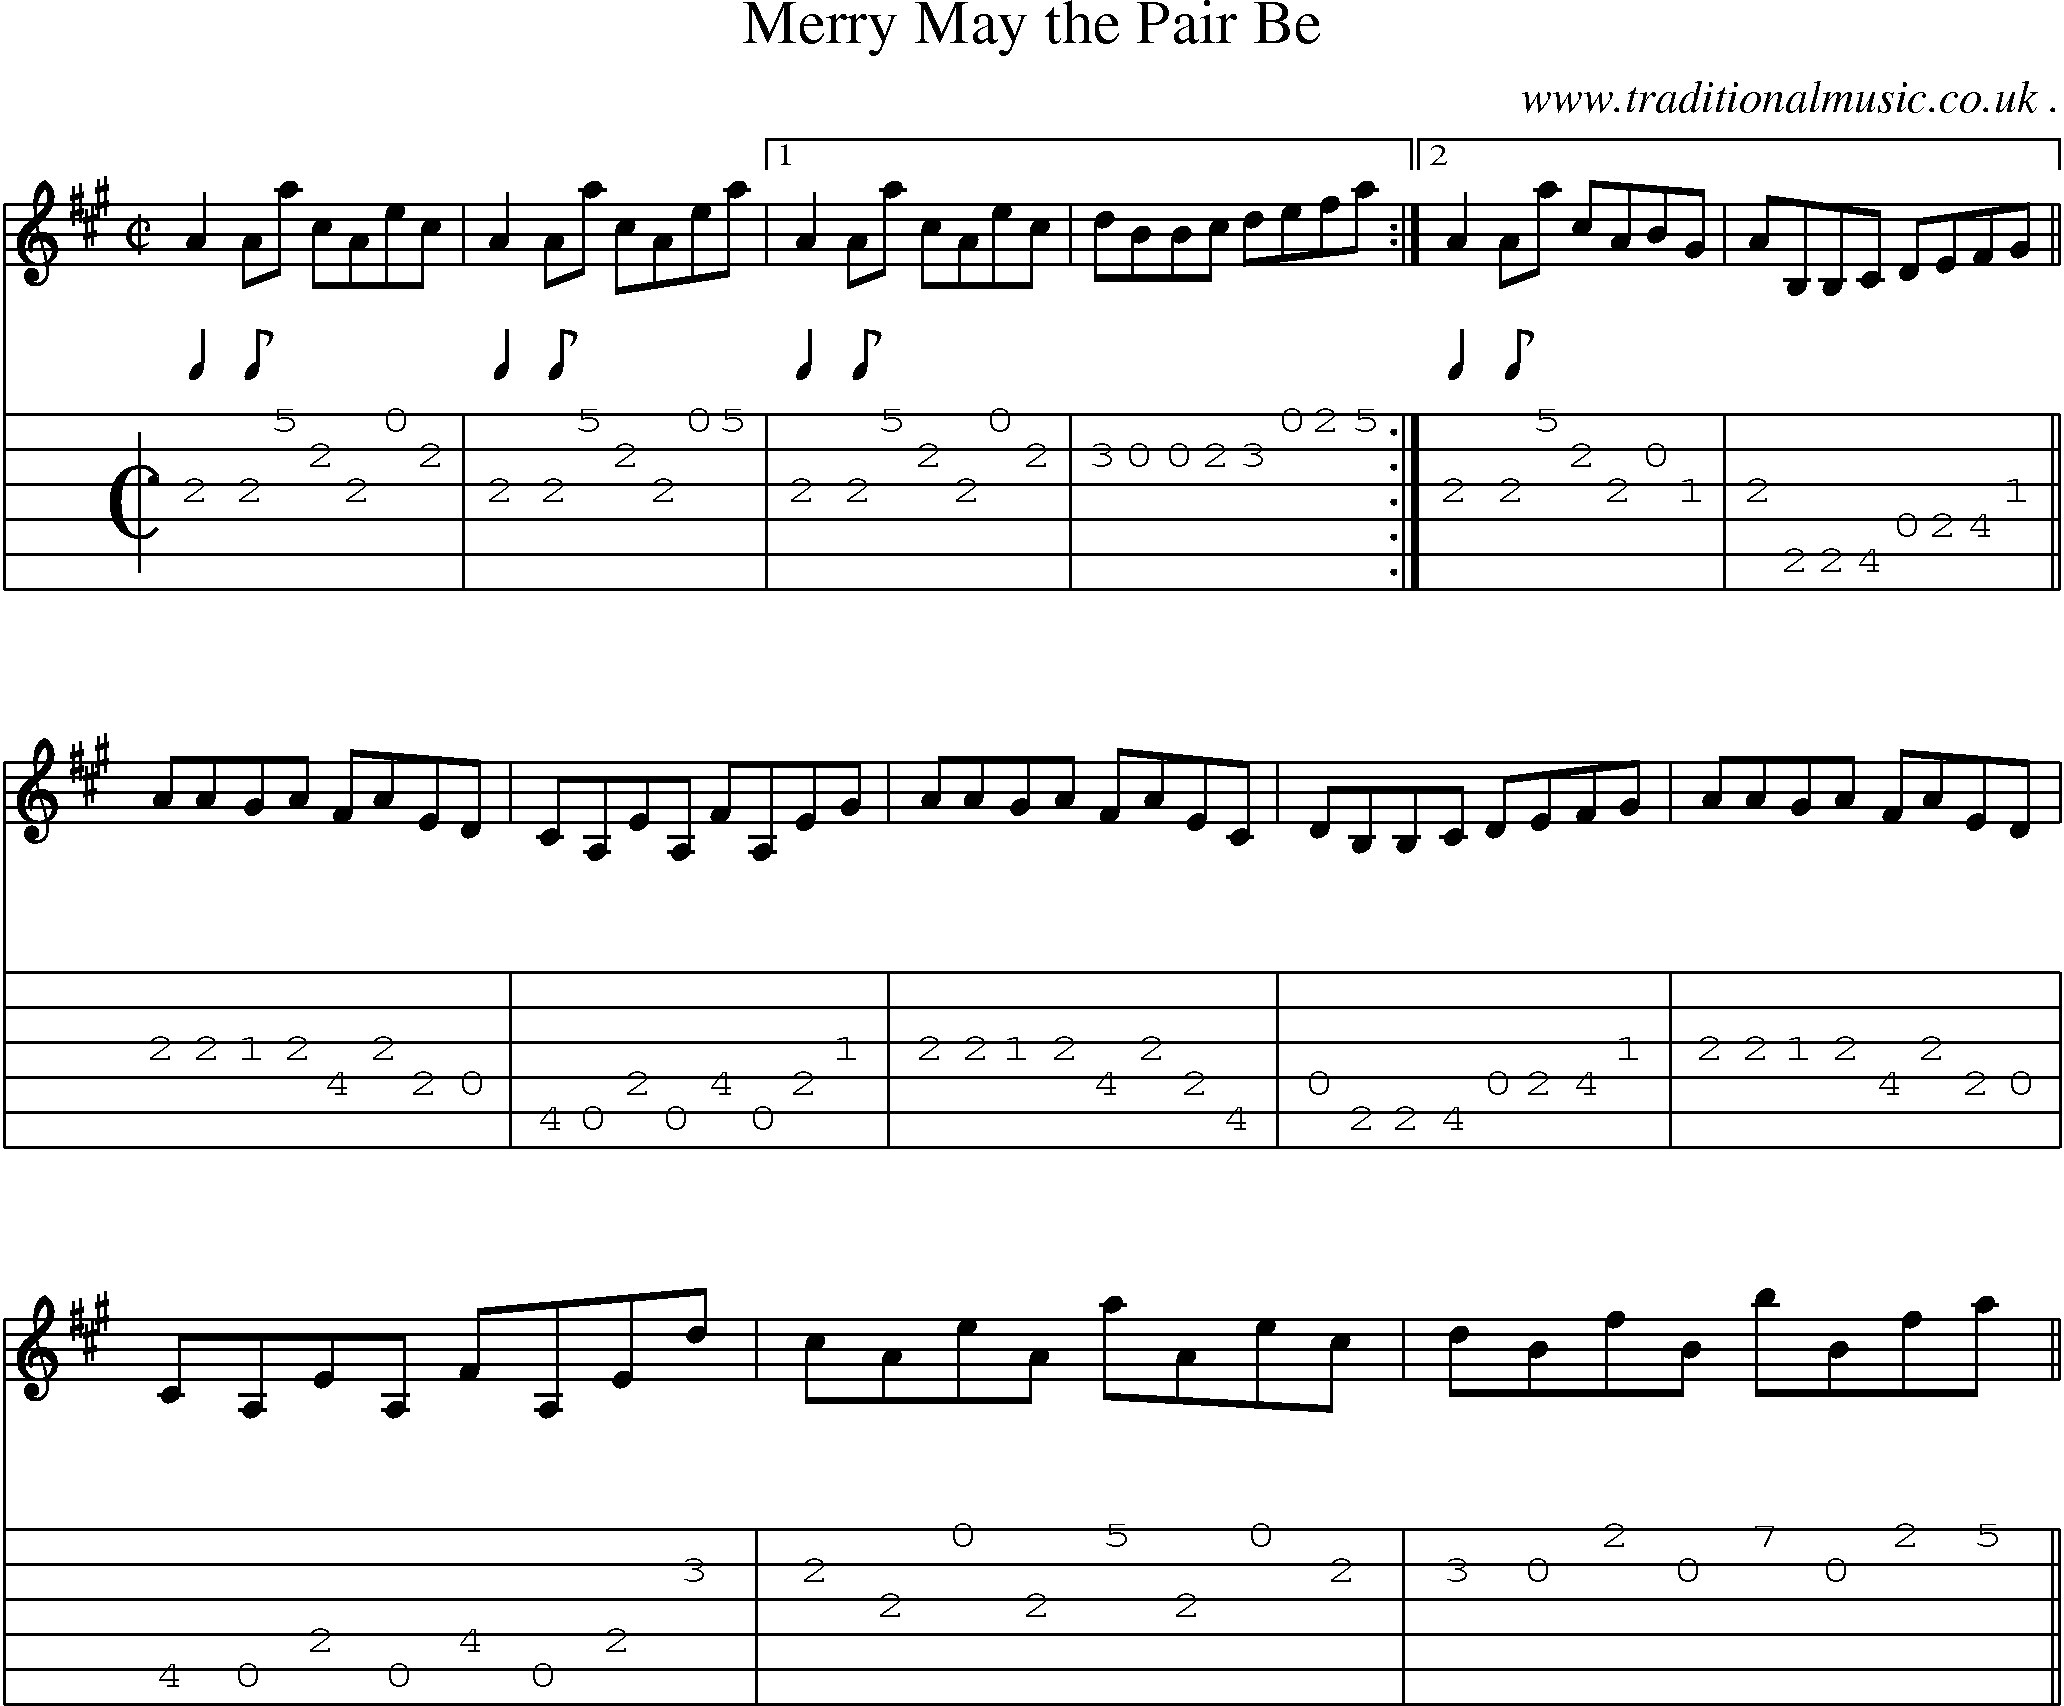 Sheet-music  score, Chords and Guitar Tabs for Merry May The Pair Be